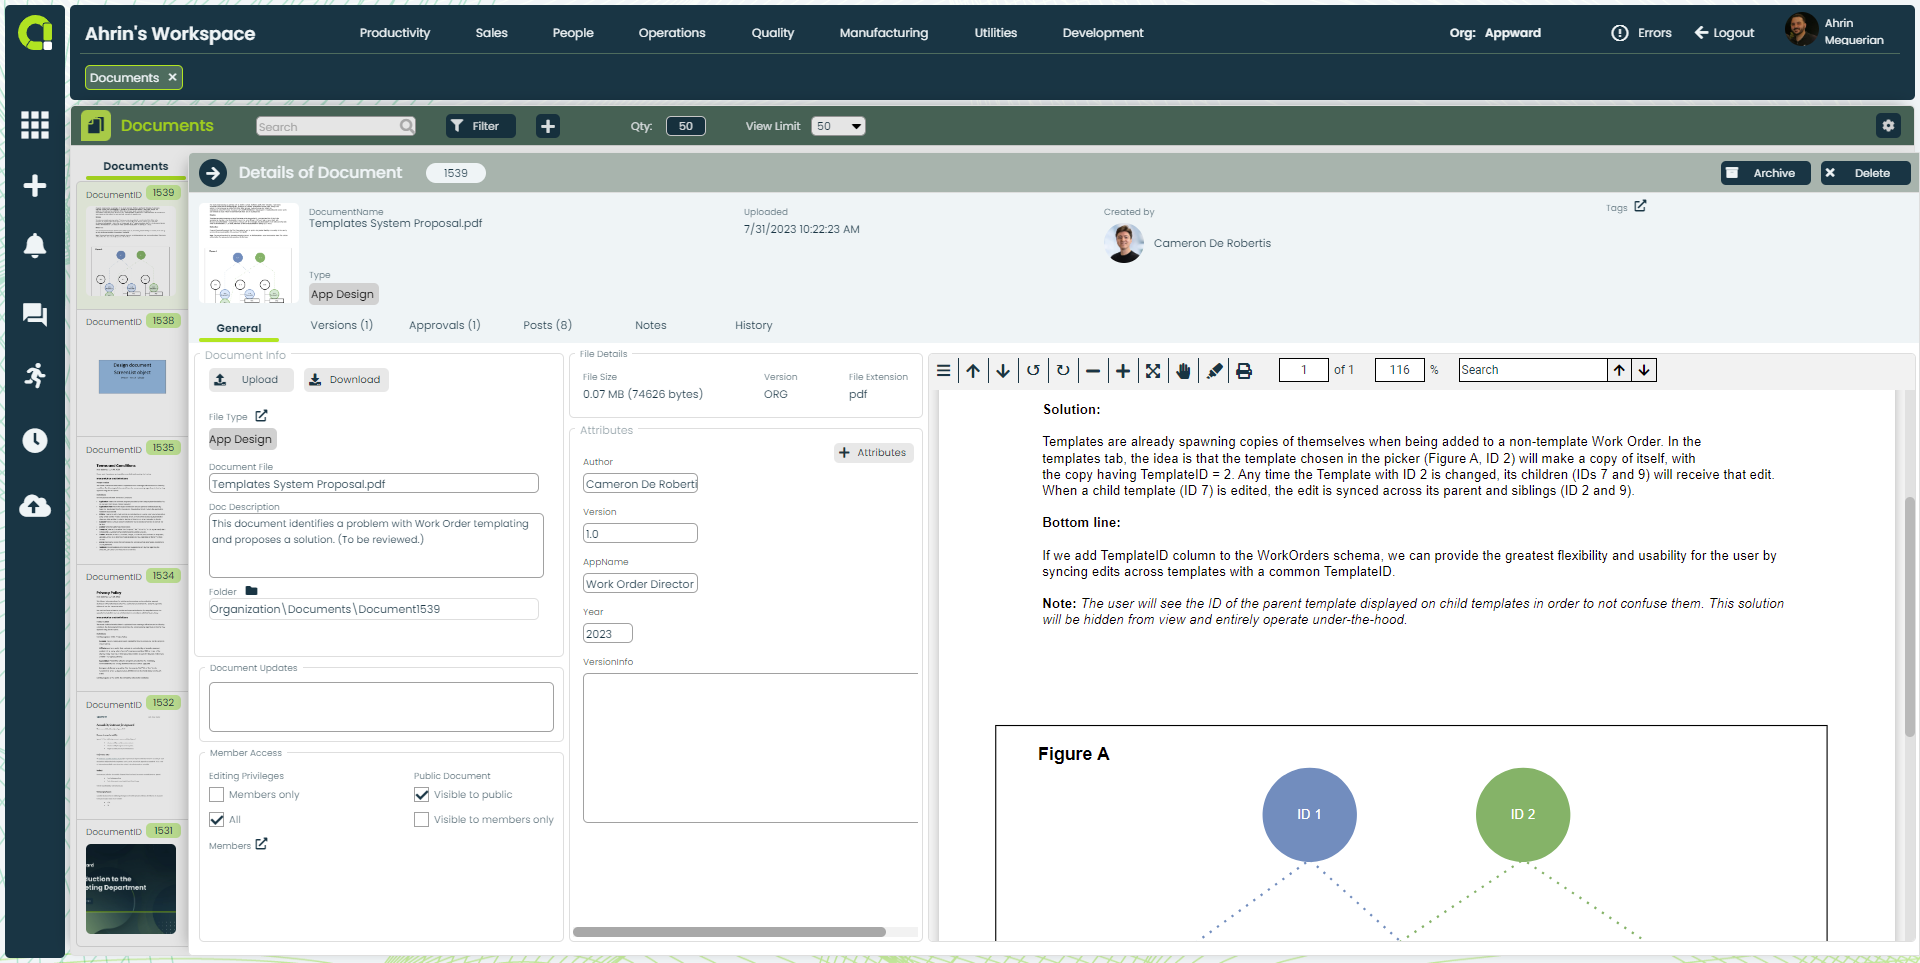 Appward Project Management Software Tools with Centralized Document Control System